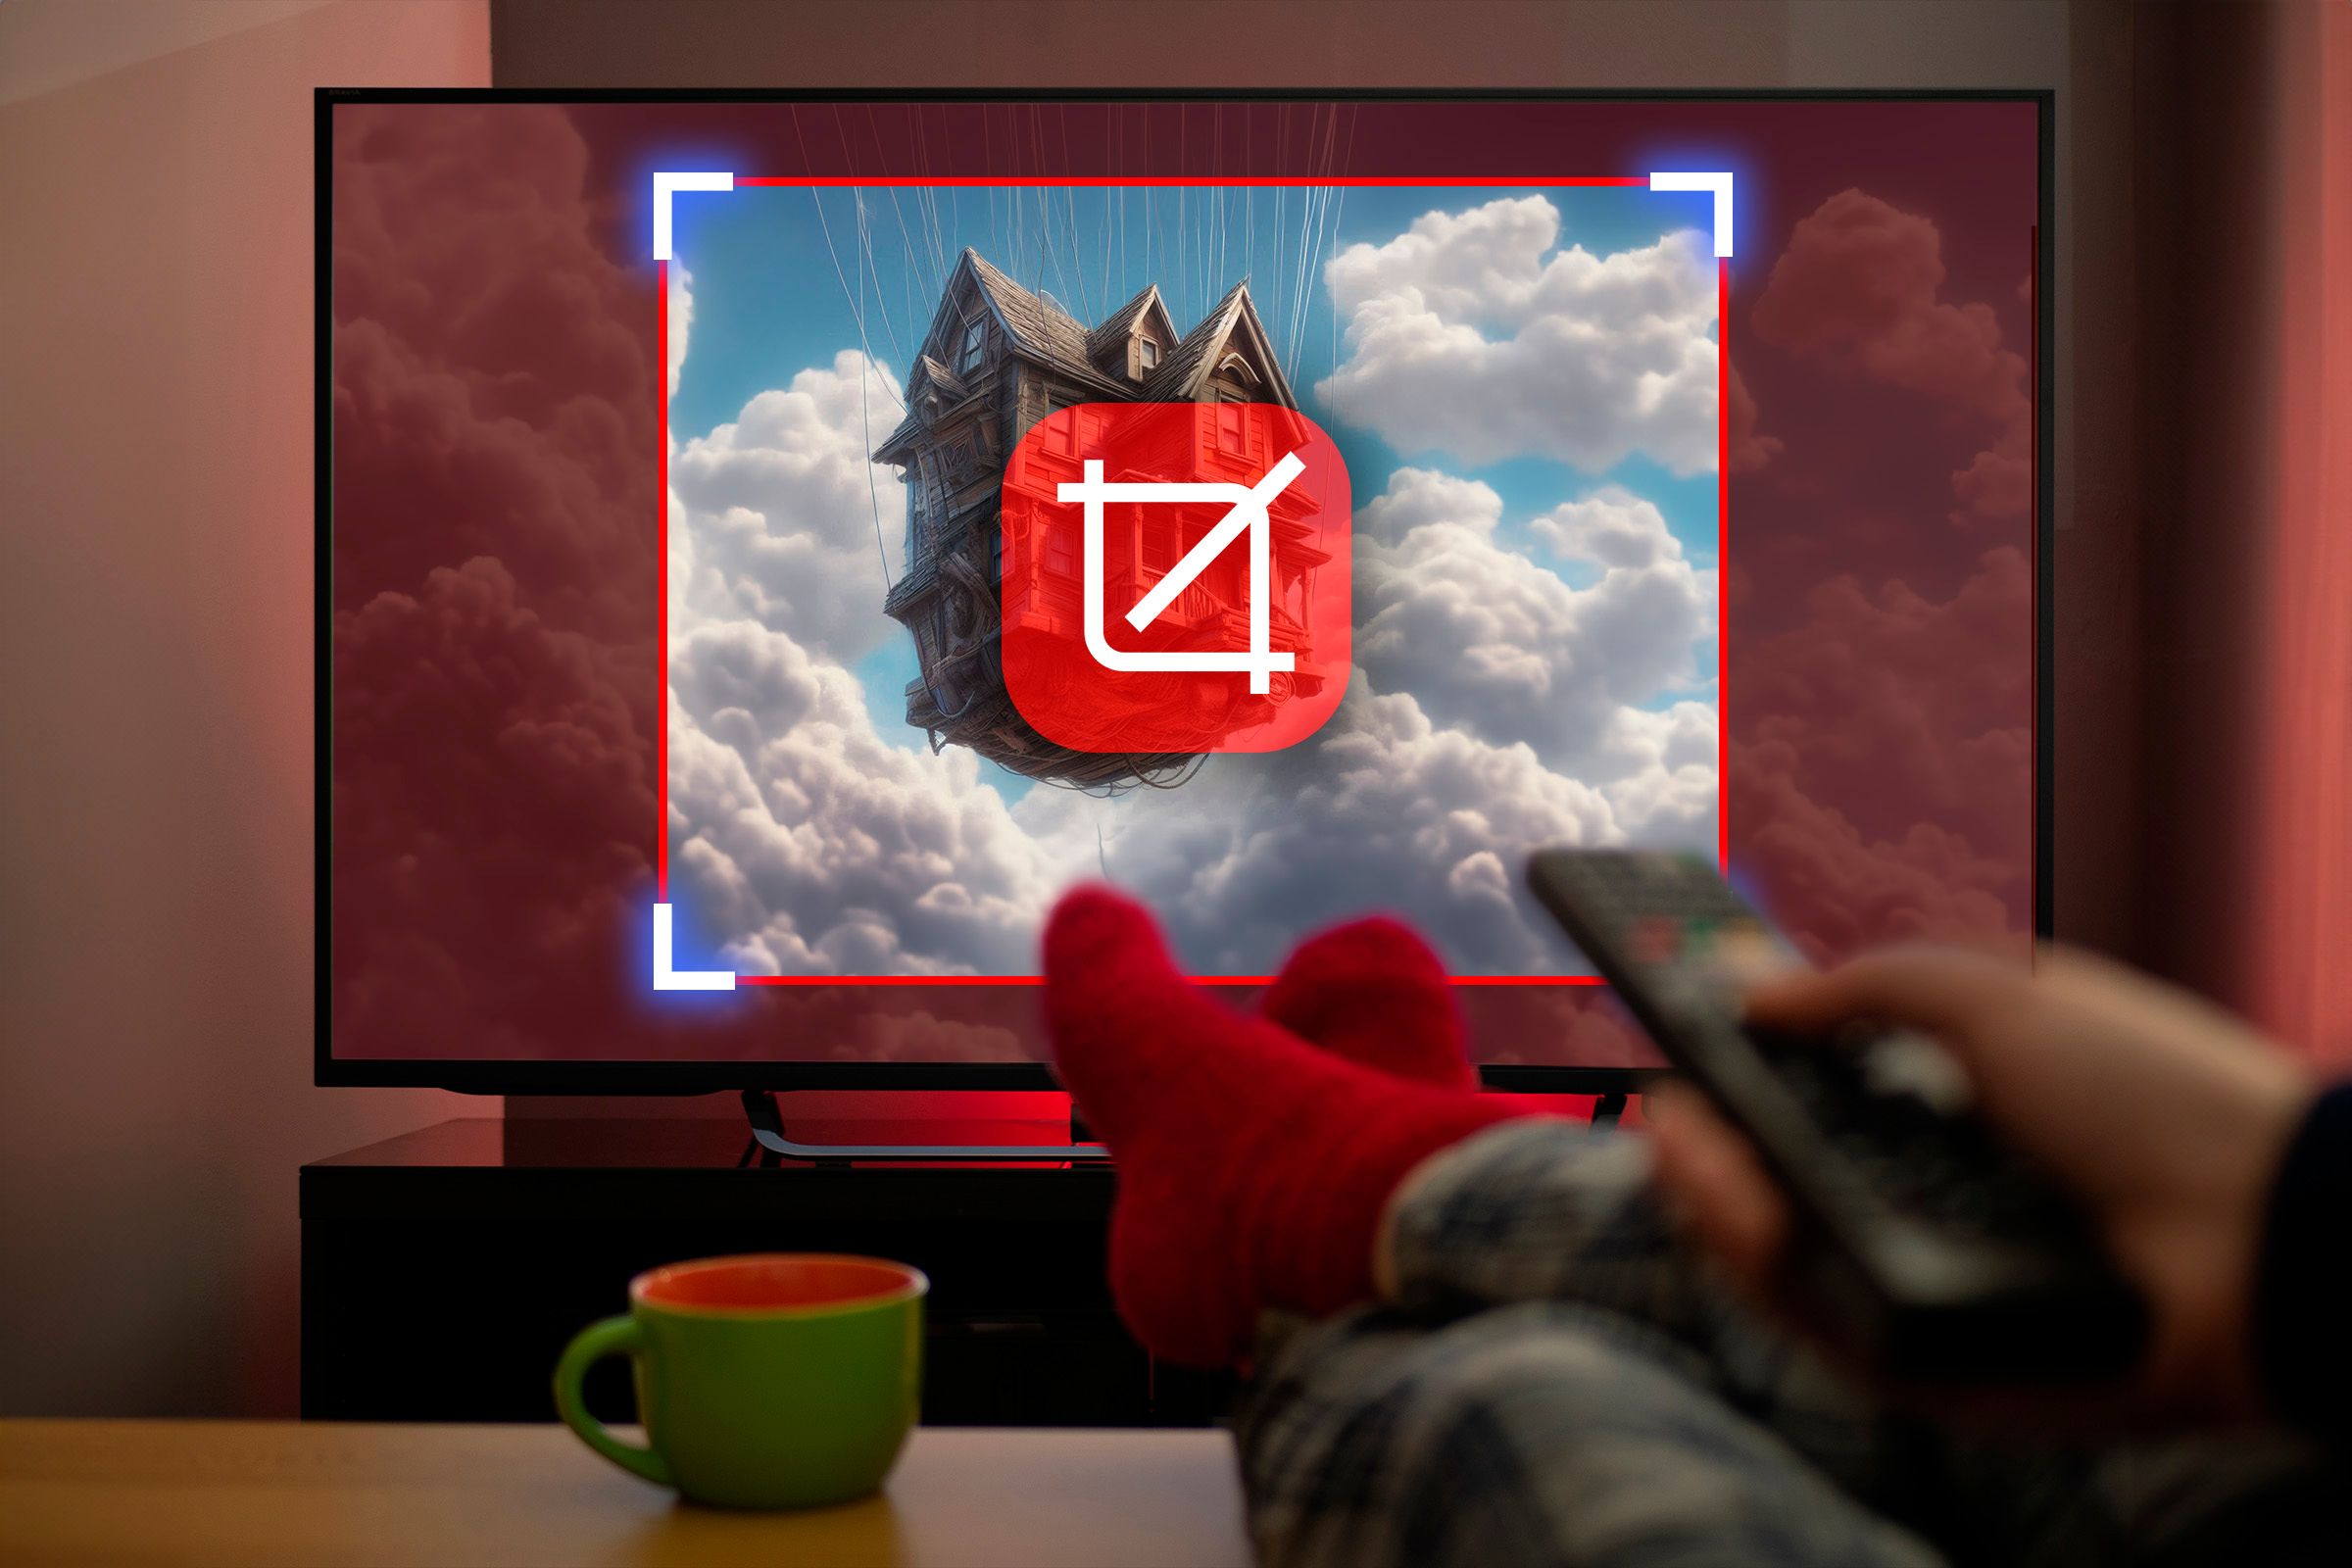 A person watching TV with the movie in a cropped region and a crop icon in the center.